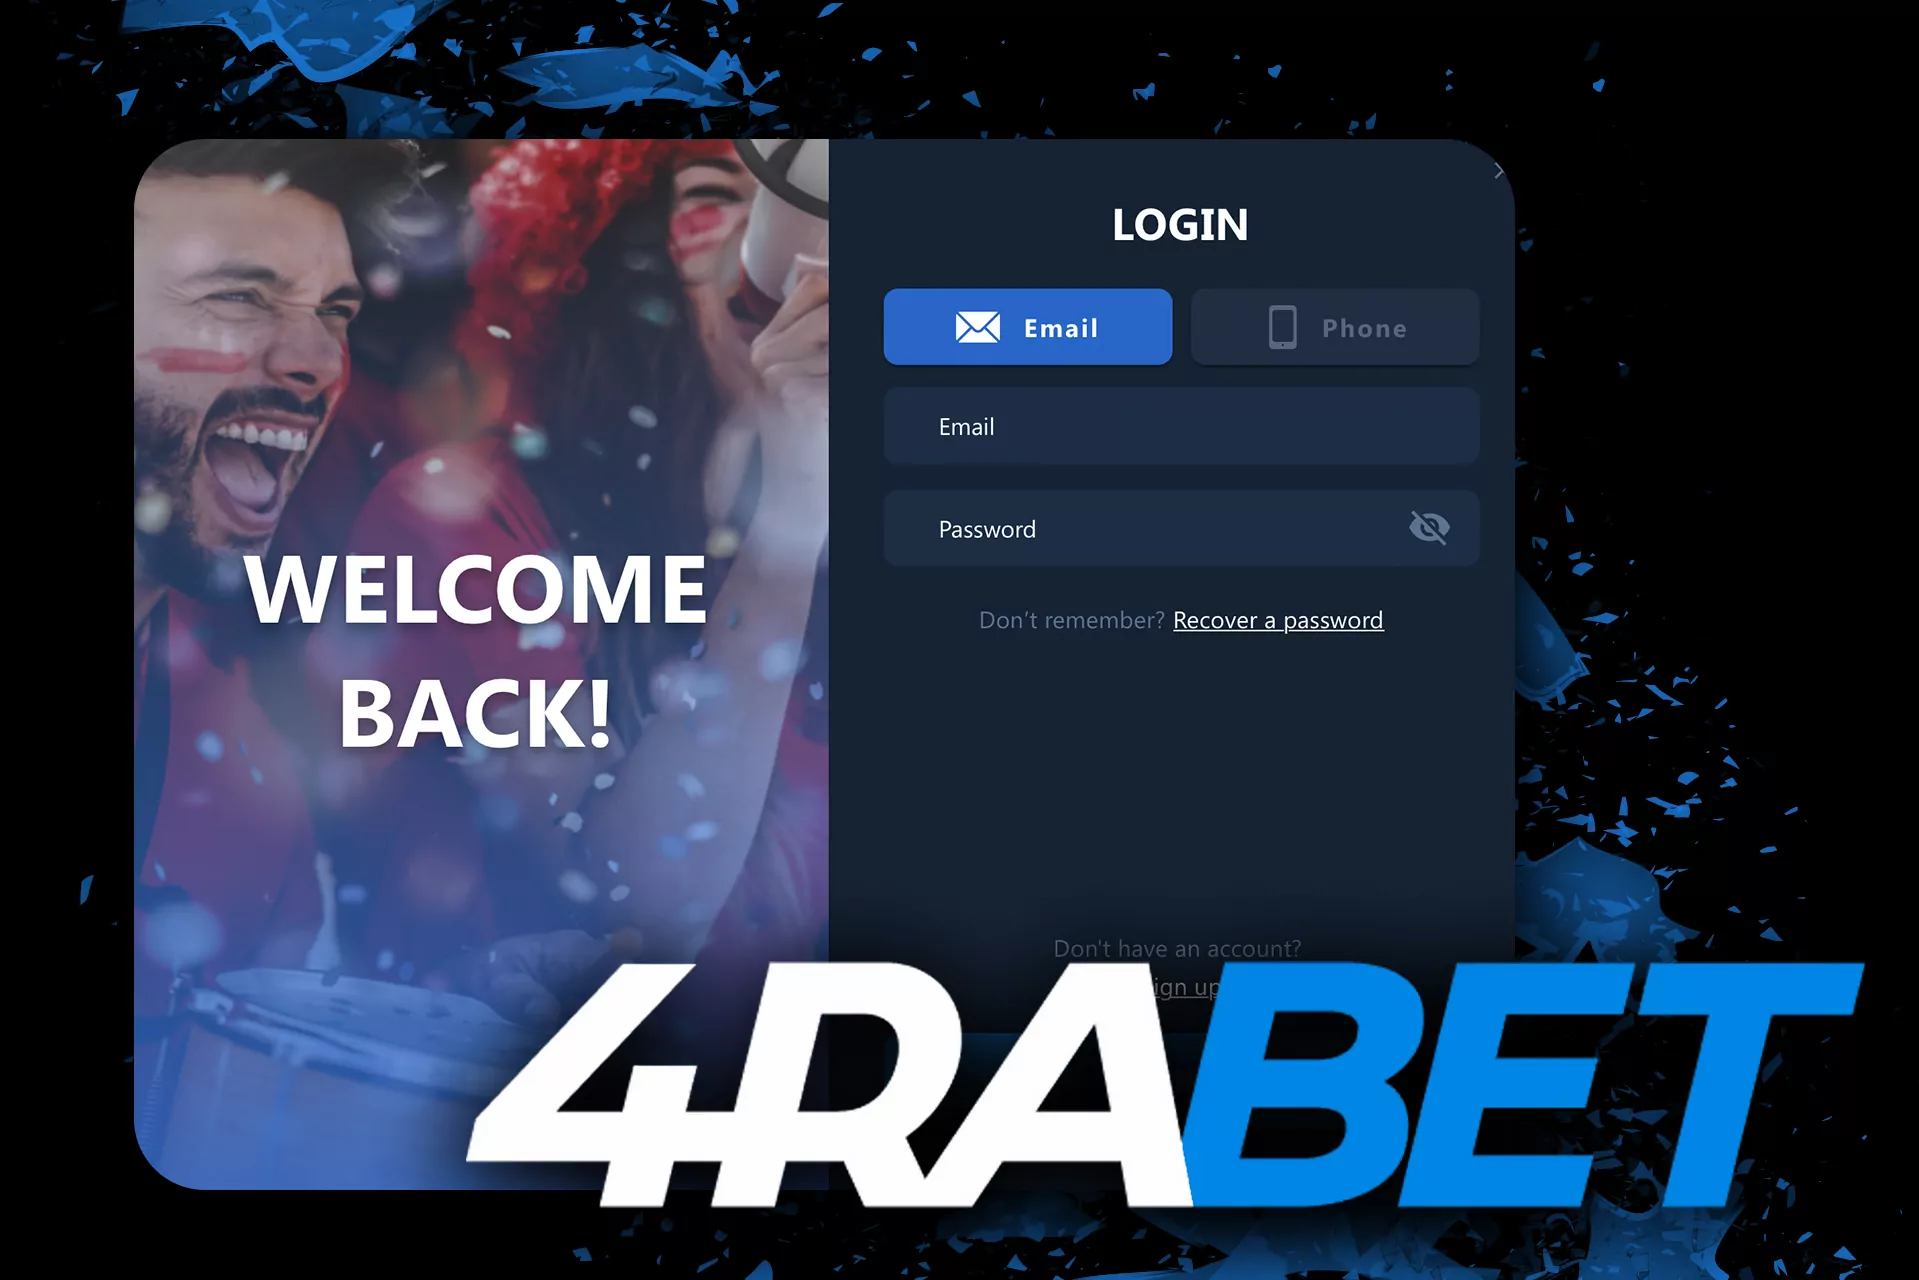 Enter your login and a password to log in to 4rabet.